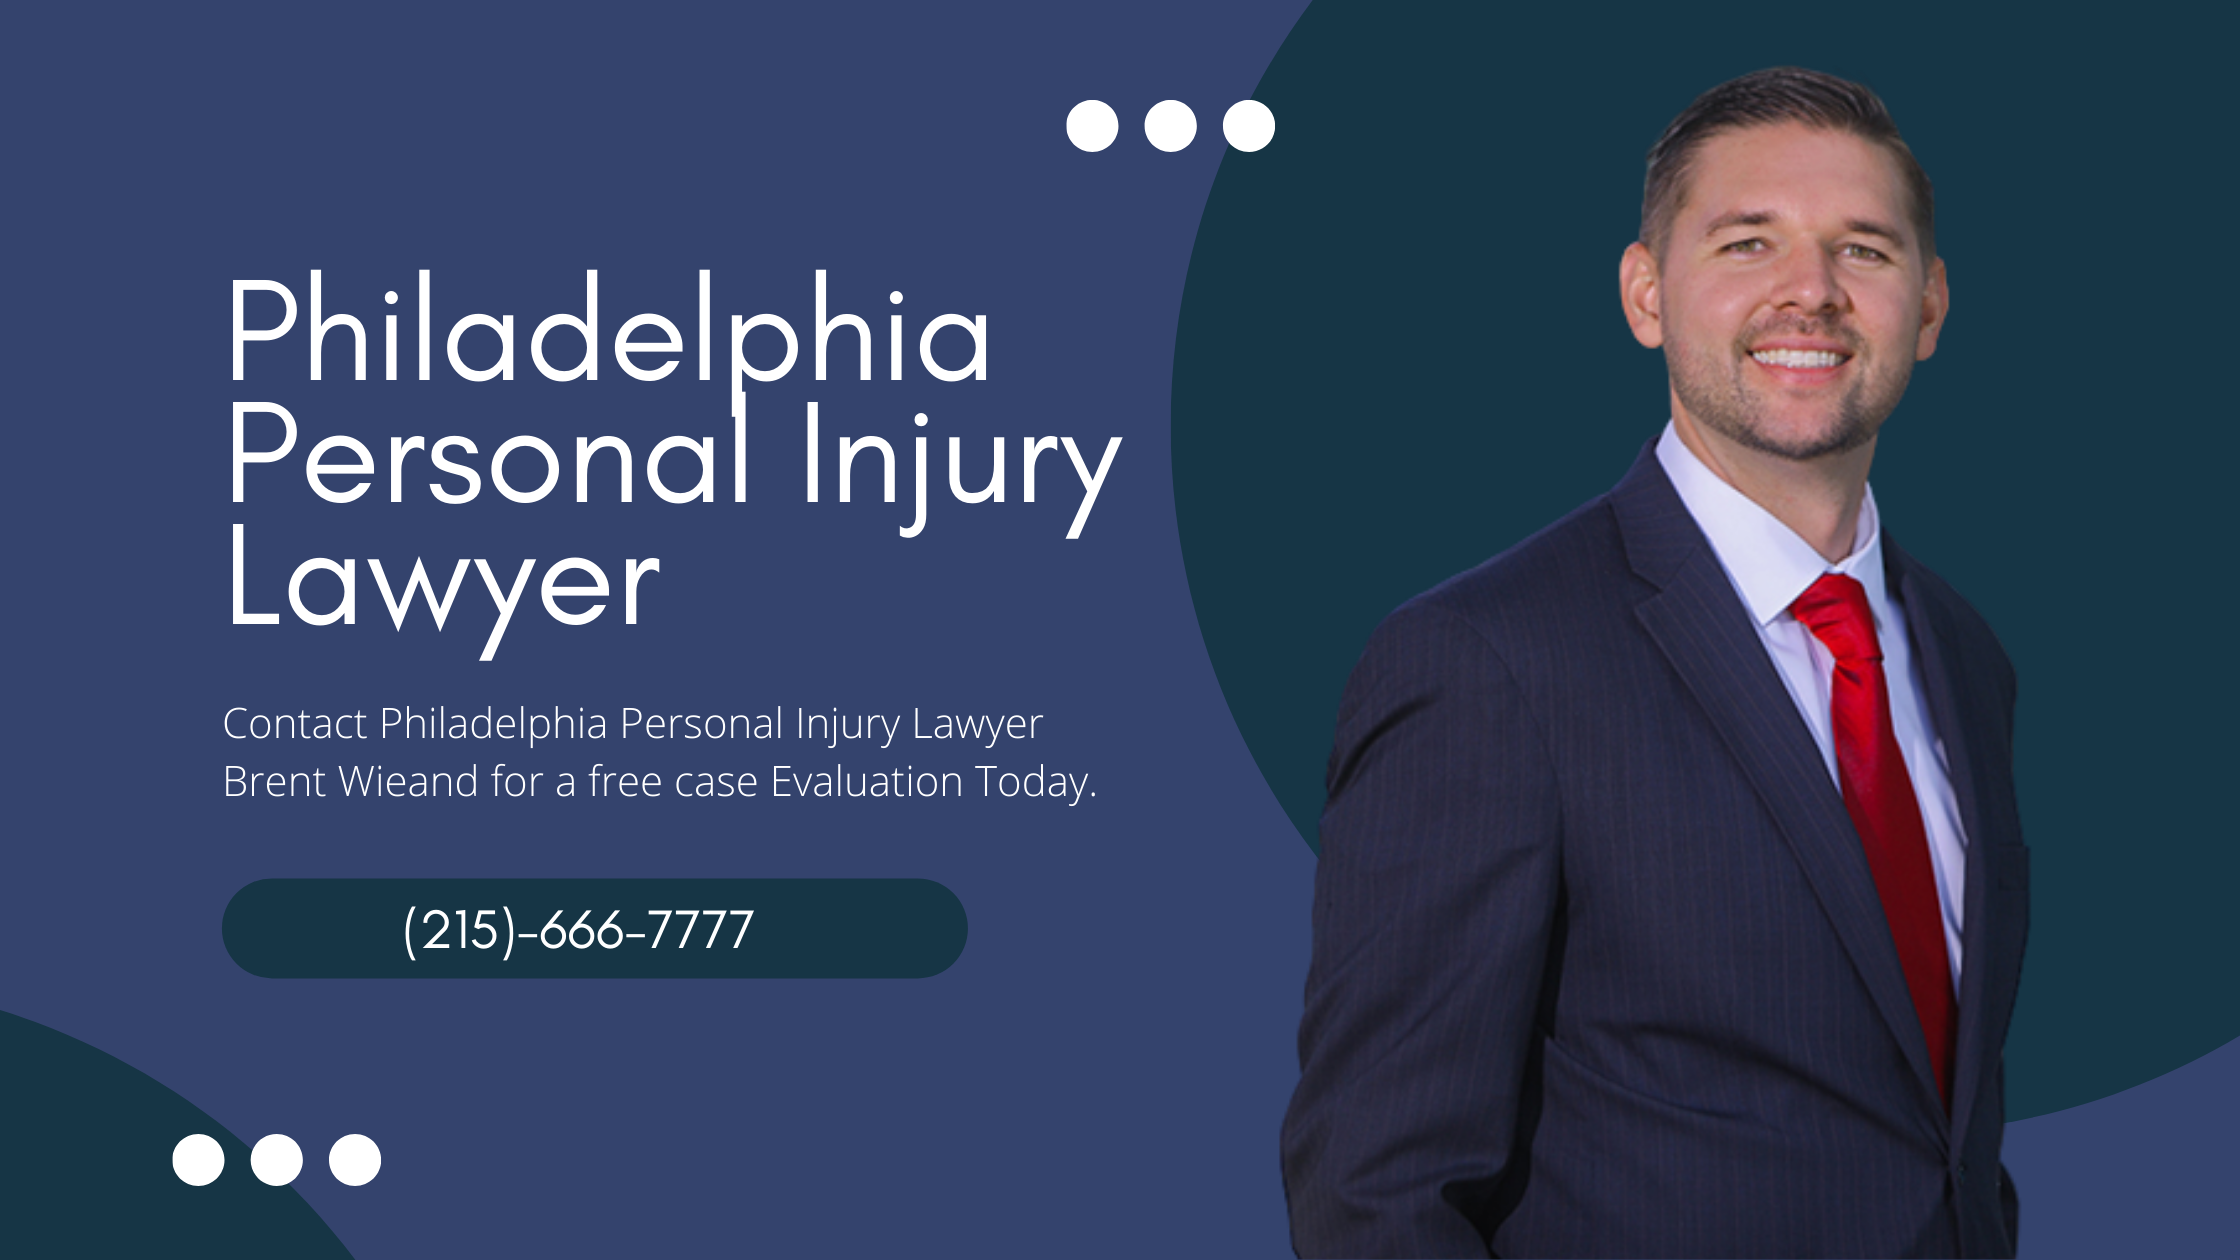 Contact Philadelphia Personal Injury Lawyer Brent Wieand